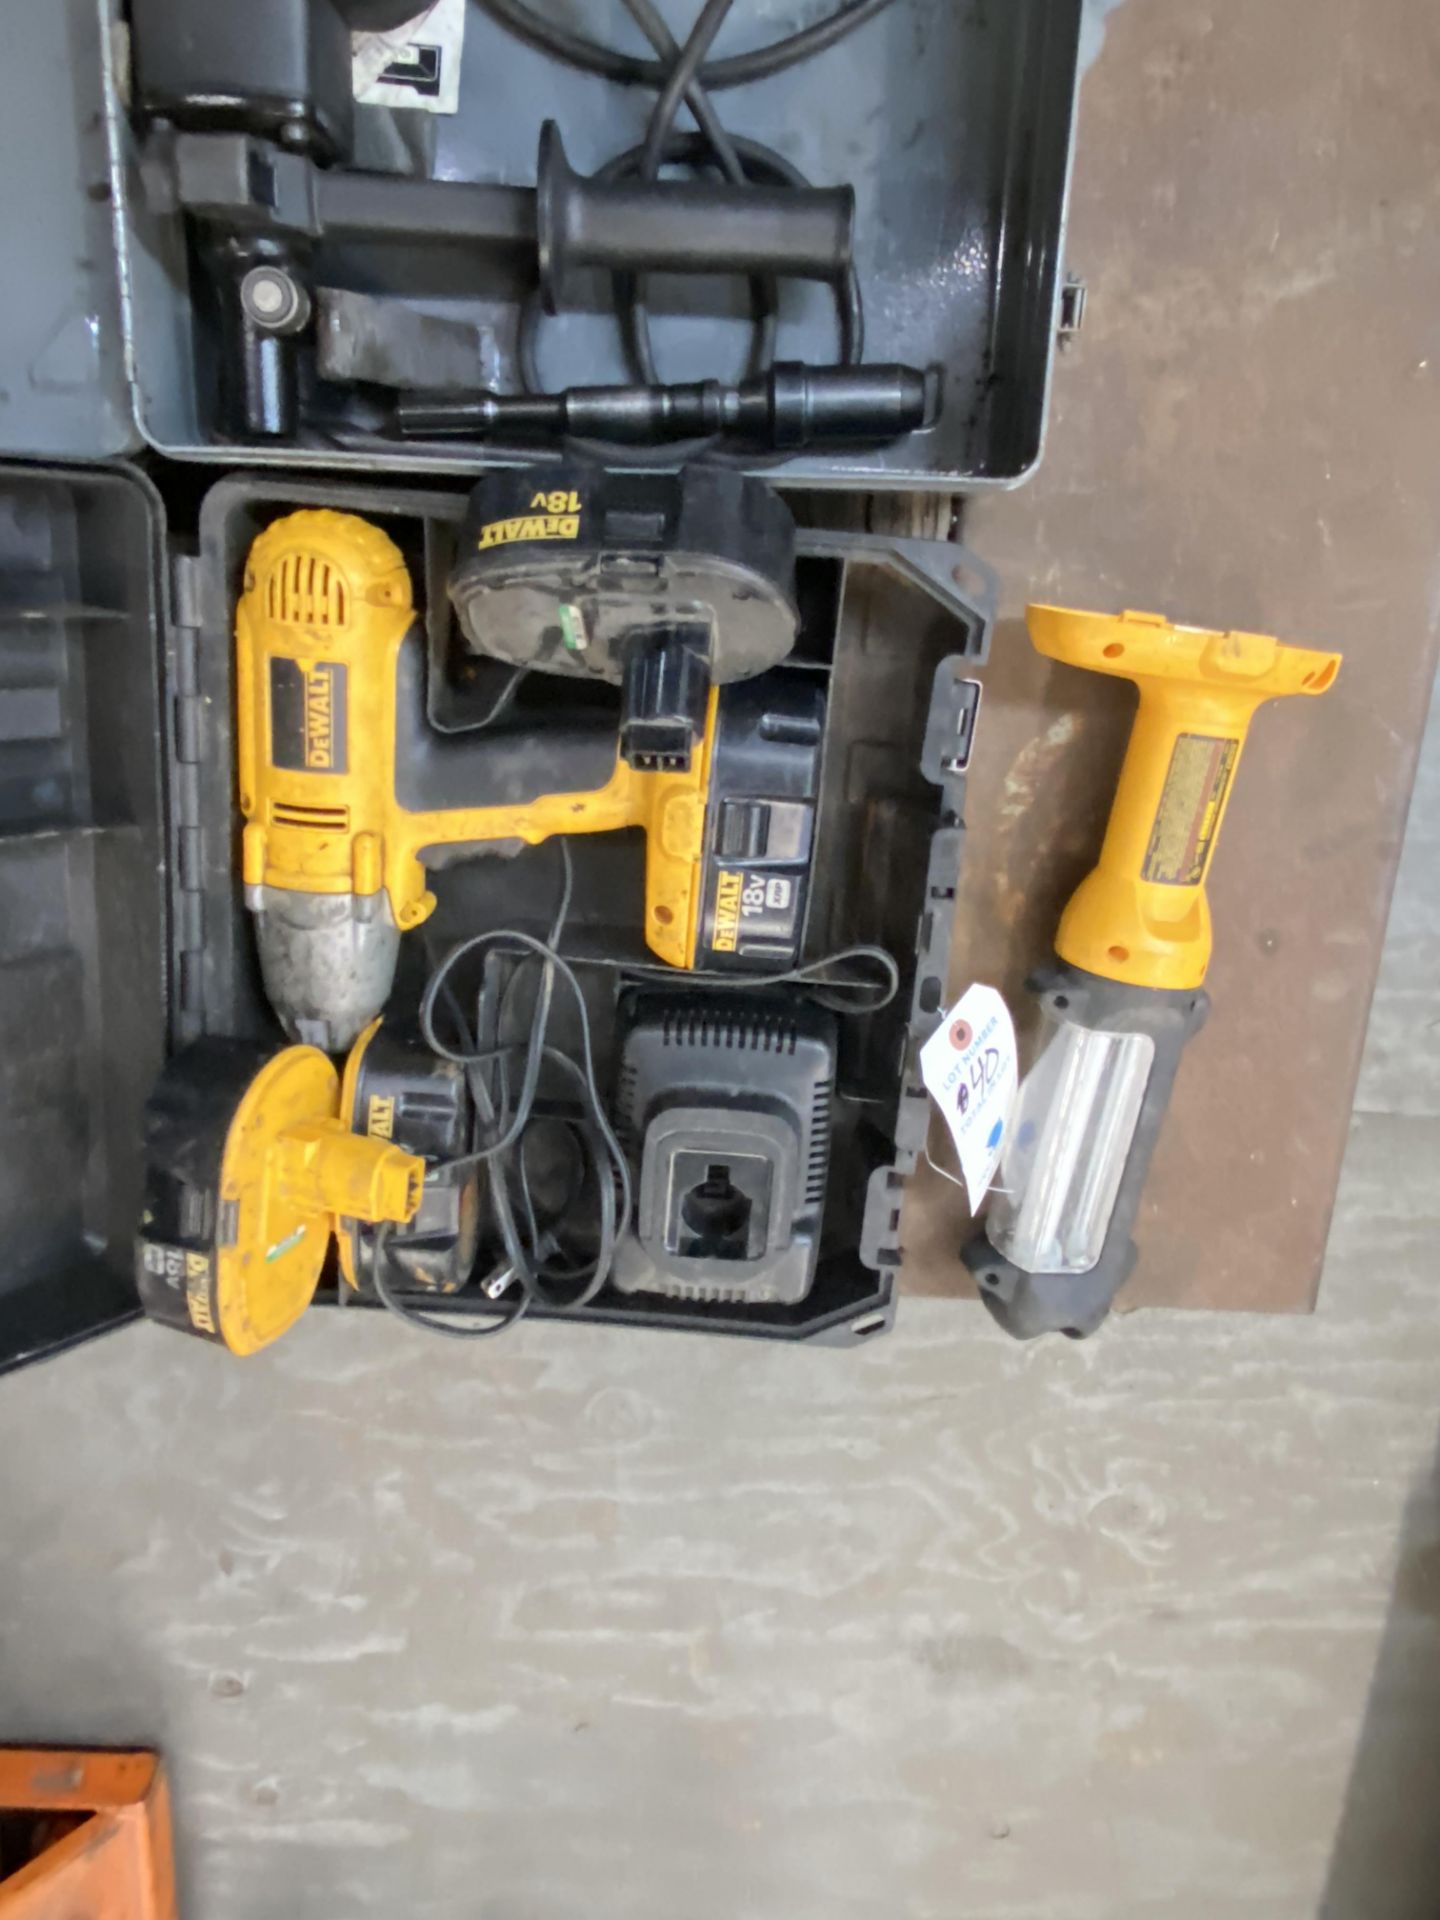 DeWalt Battery Powered Drill & 18v Heavy Duty 1/2" Impact Gun Both w/ Case & Chargers w/ 4 Batteries - Image 3 of 4